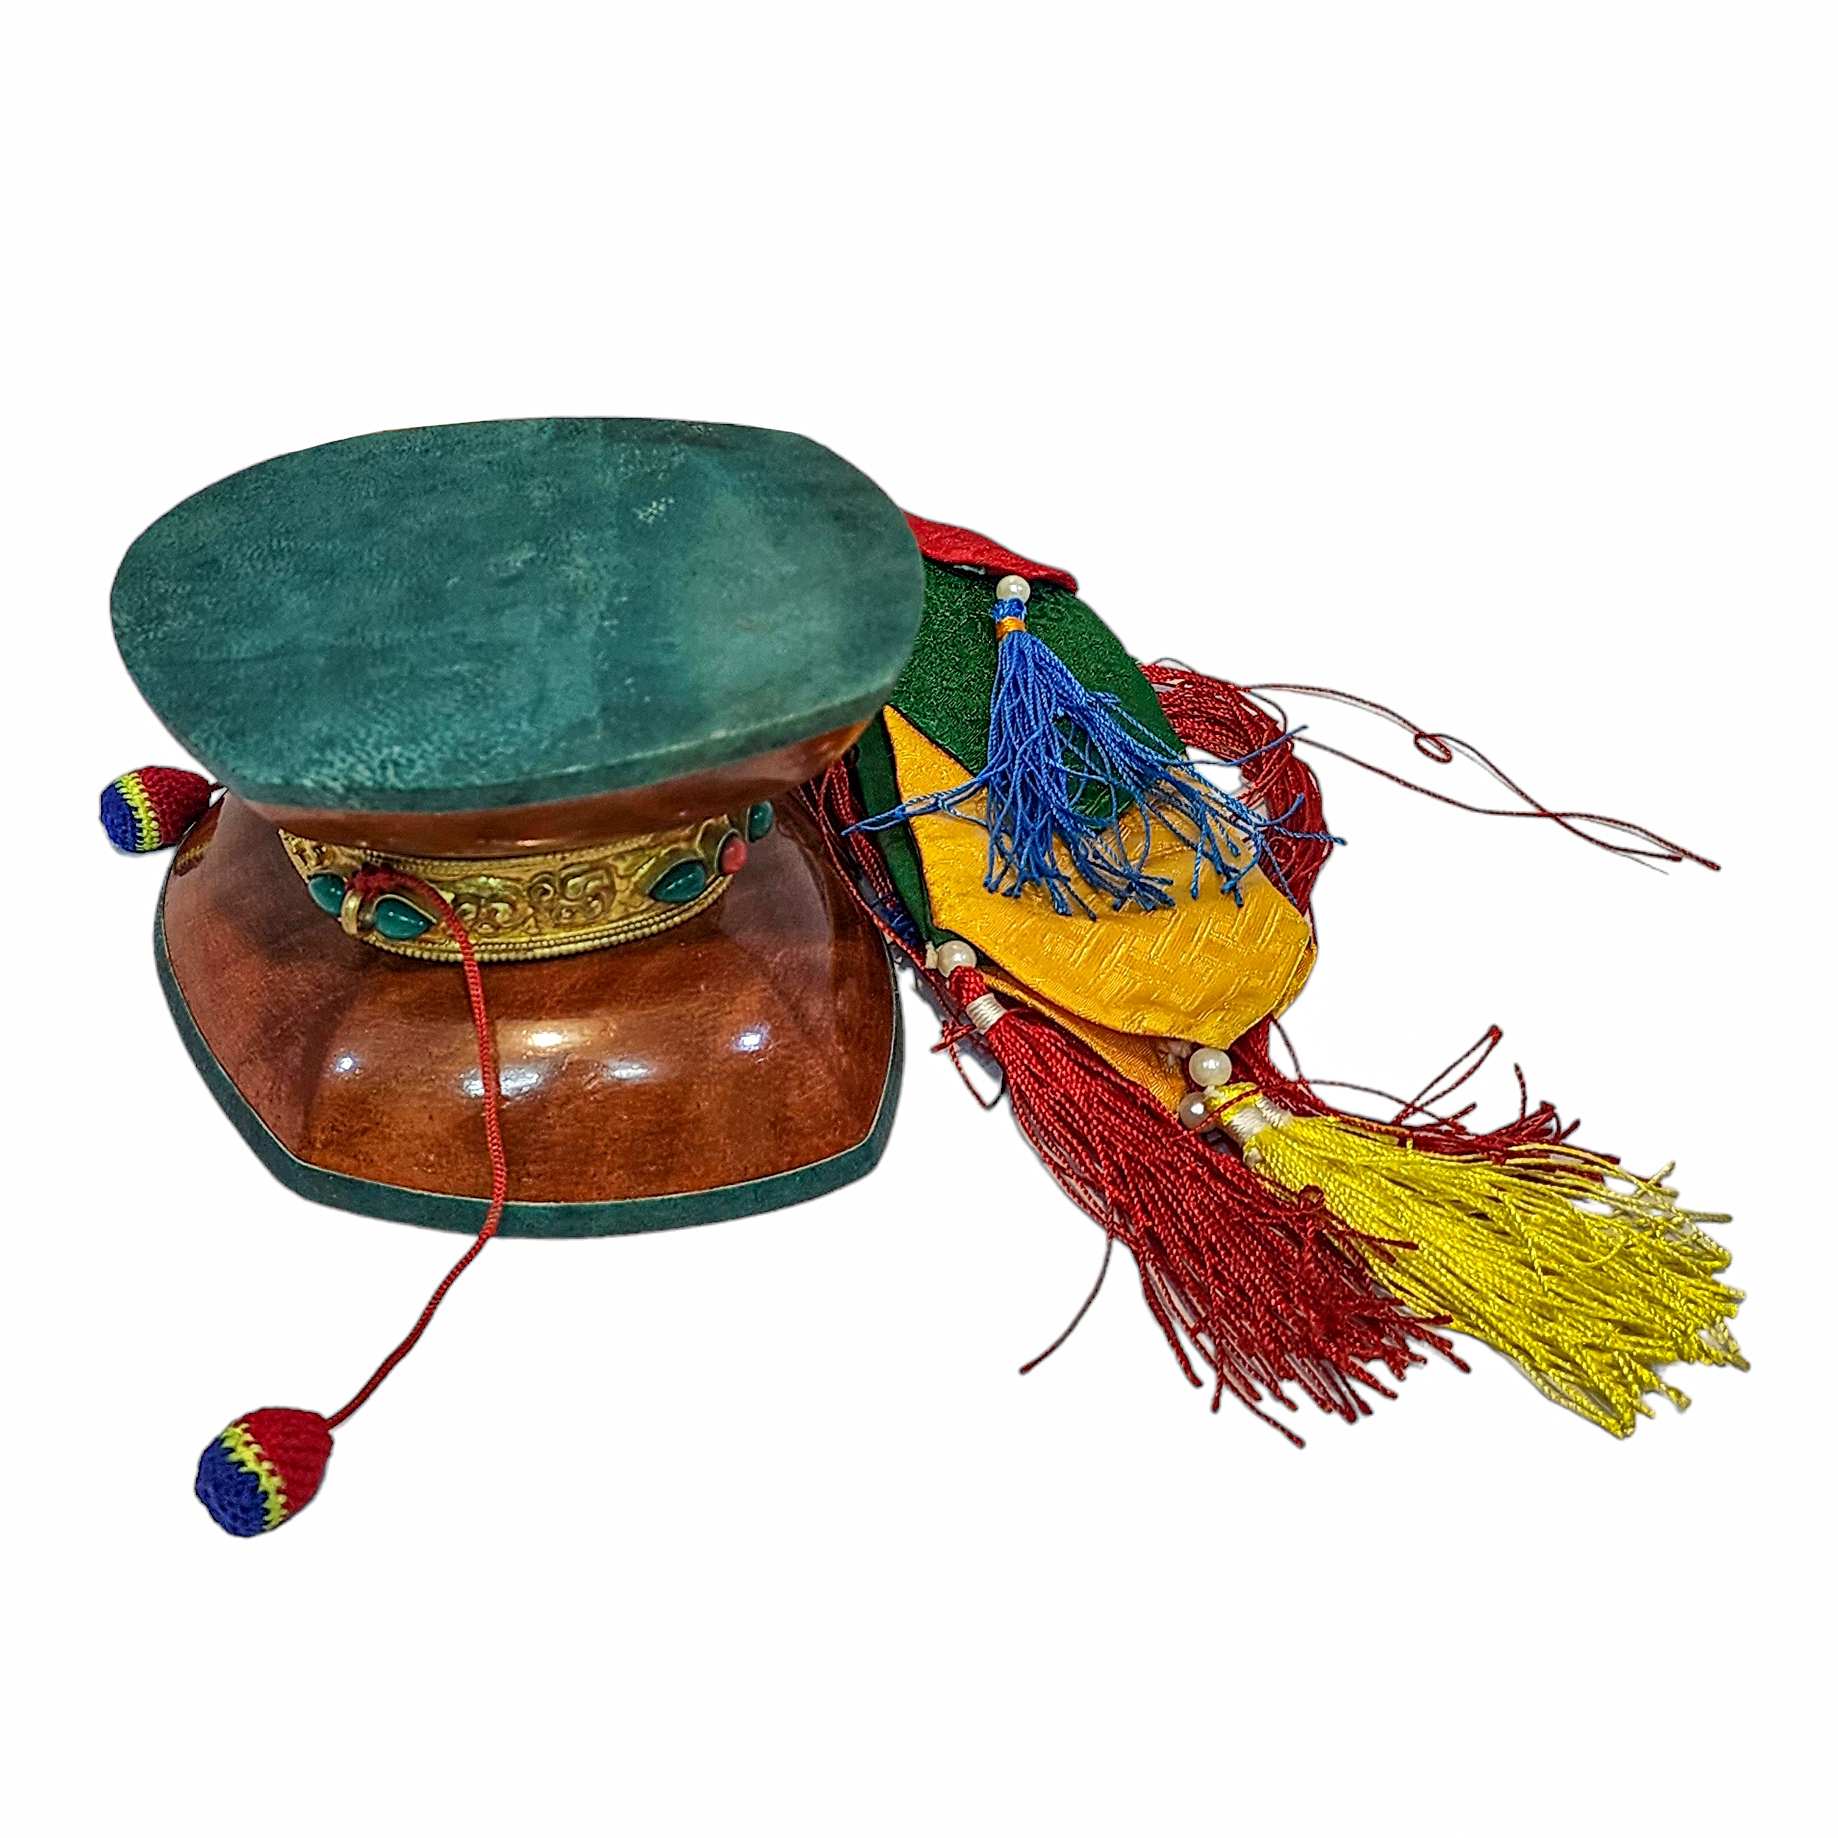 Tibetan Chod Damaru - Wooden And Leather, With Brocade Damaru Drum Cover And Damaru Brocade Tail